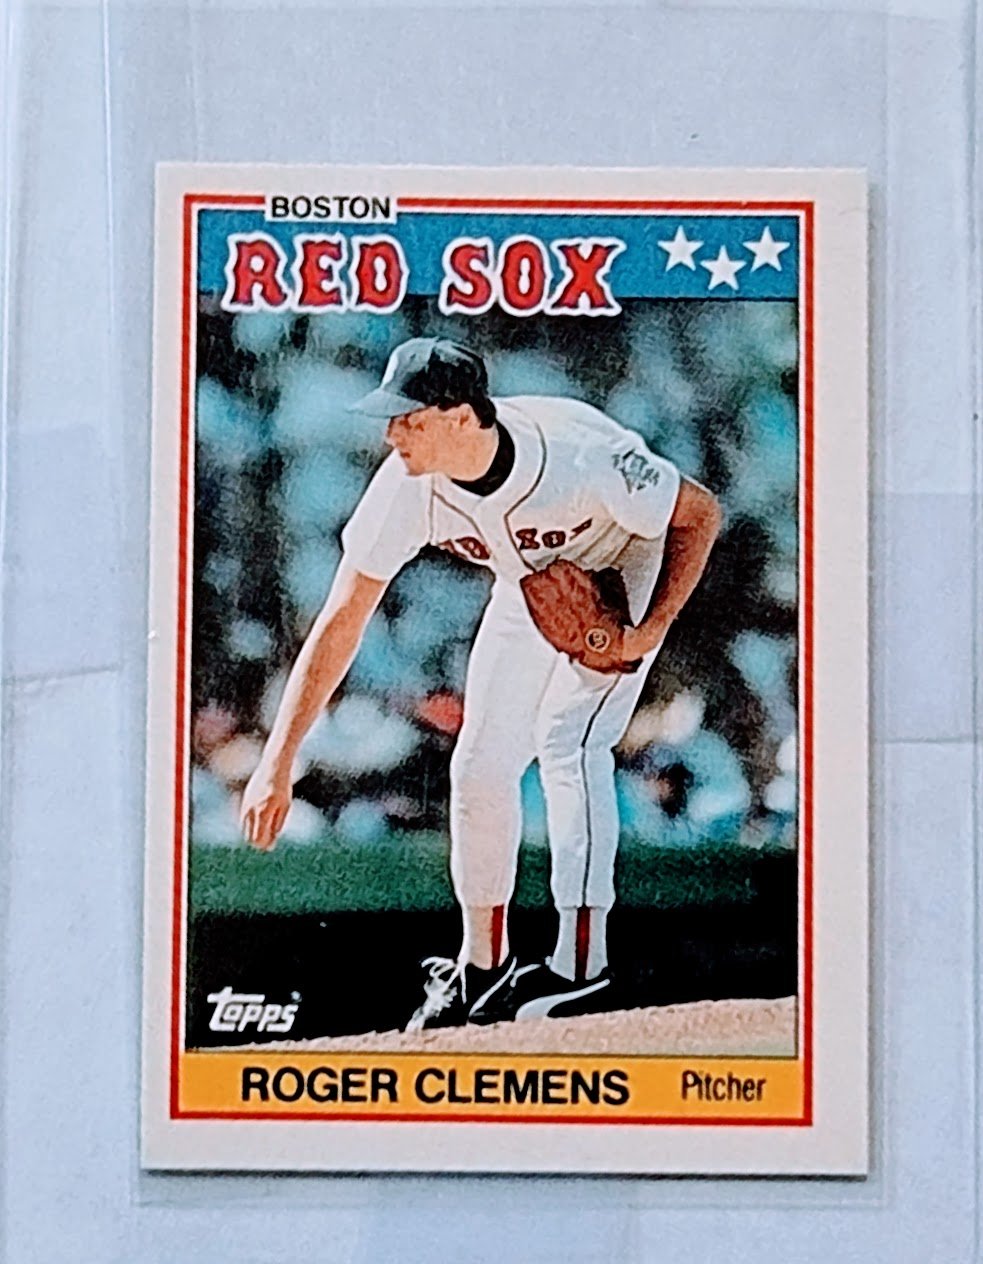 1988 Topps UK Minis Roger Clemens MLB Baseball Trading Card TPTV simple Xclusive Collectibles   